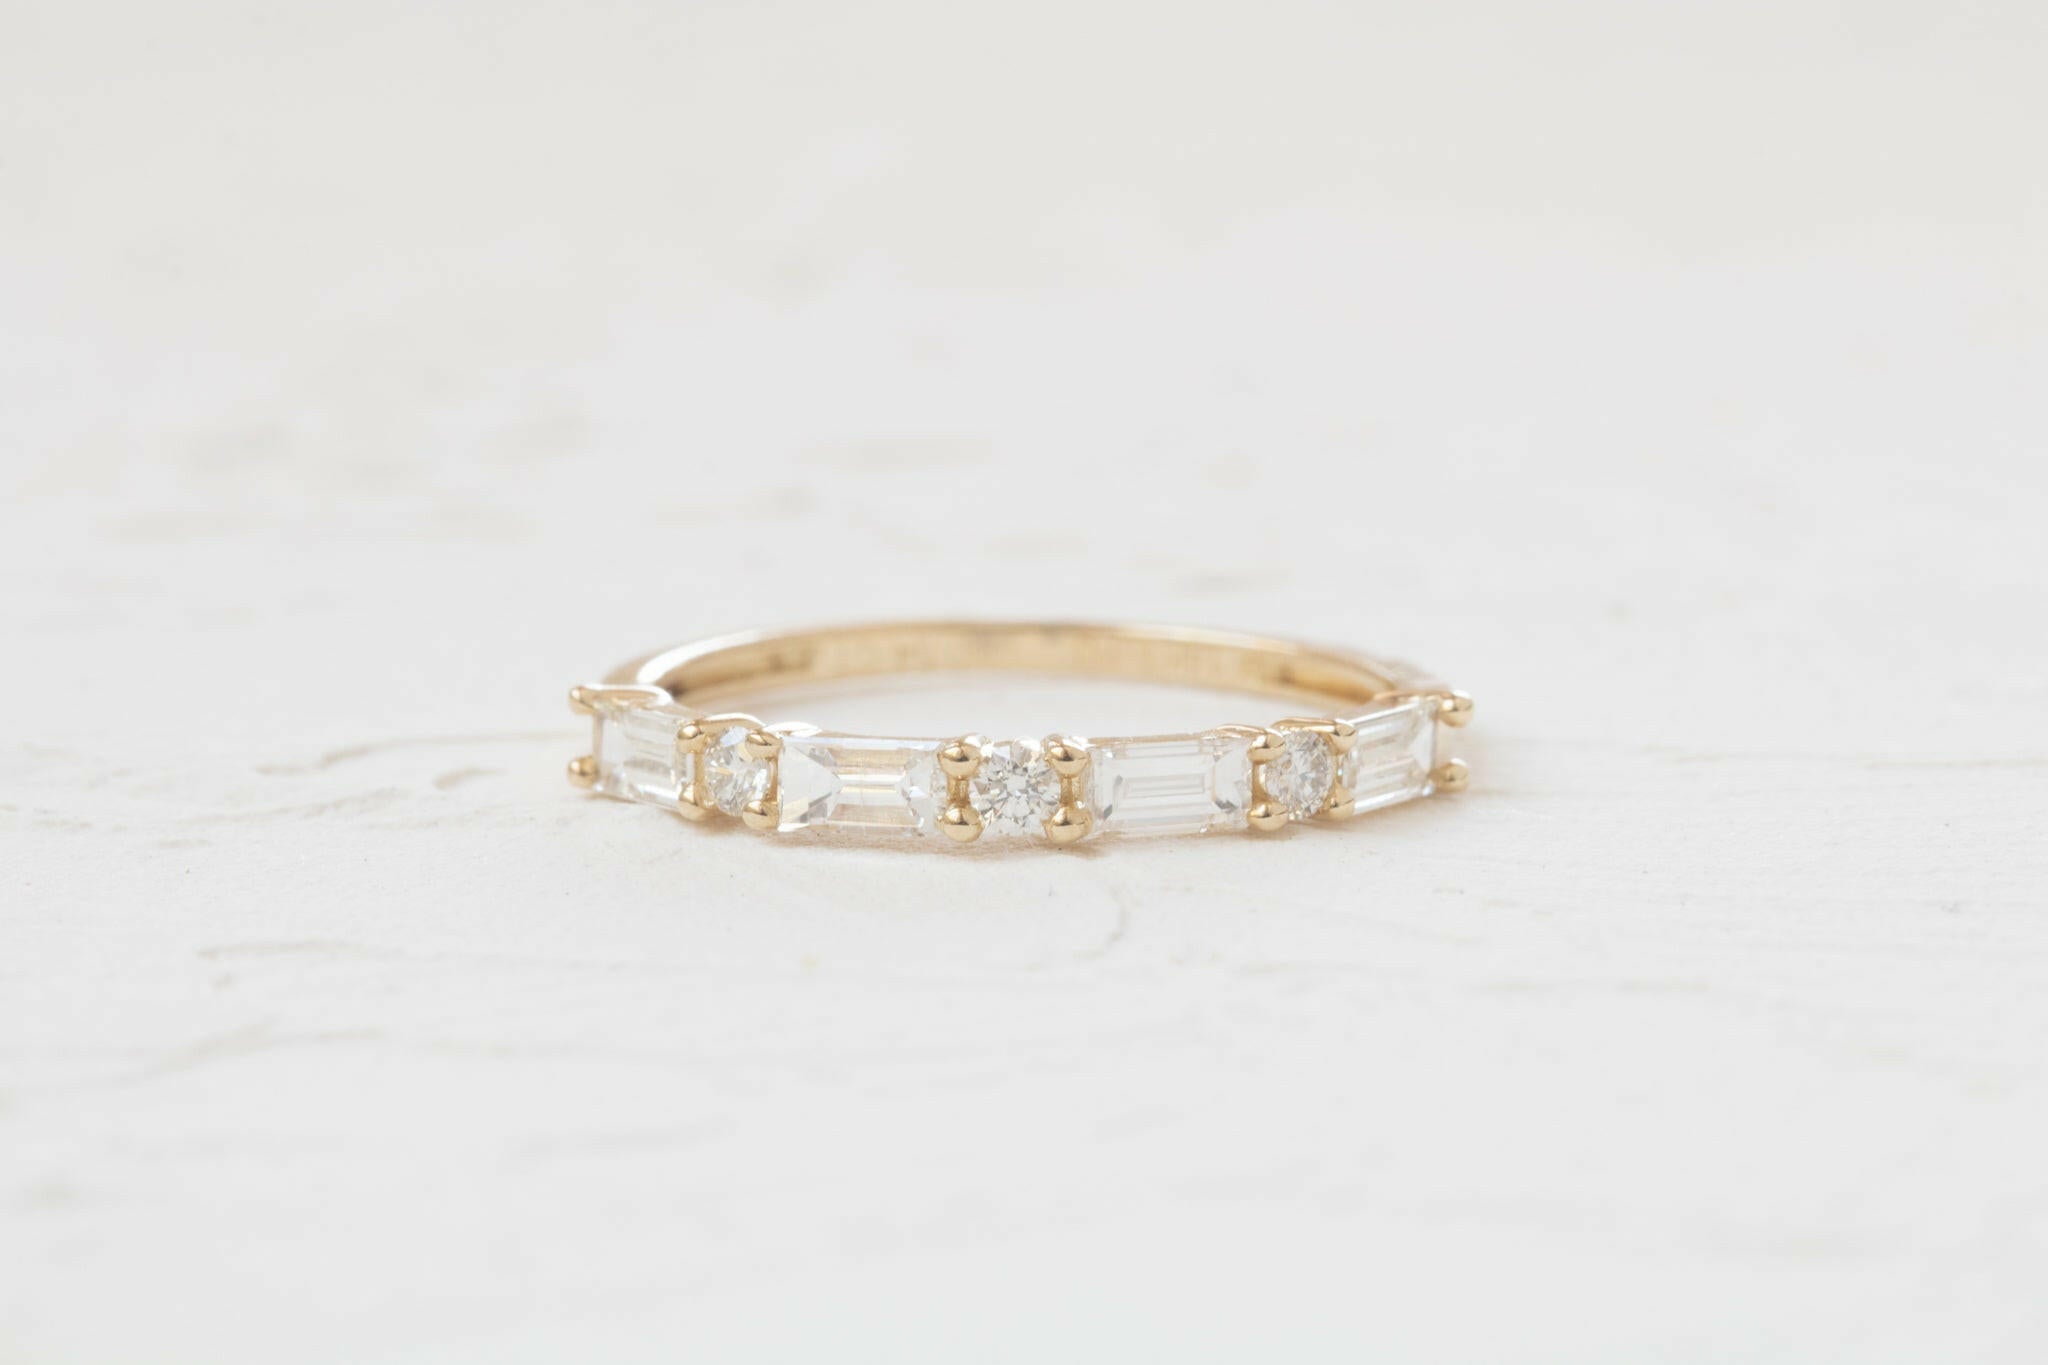 The Baguette Diamond Band Ring